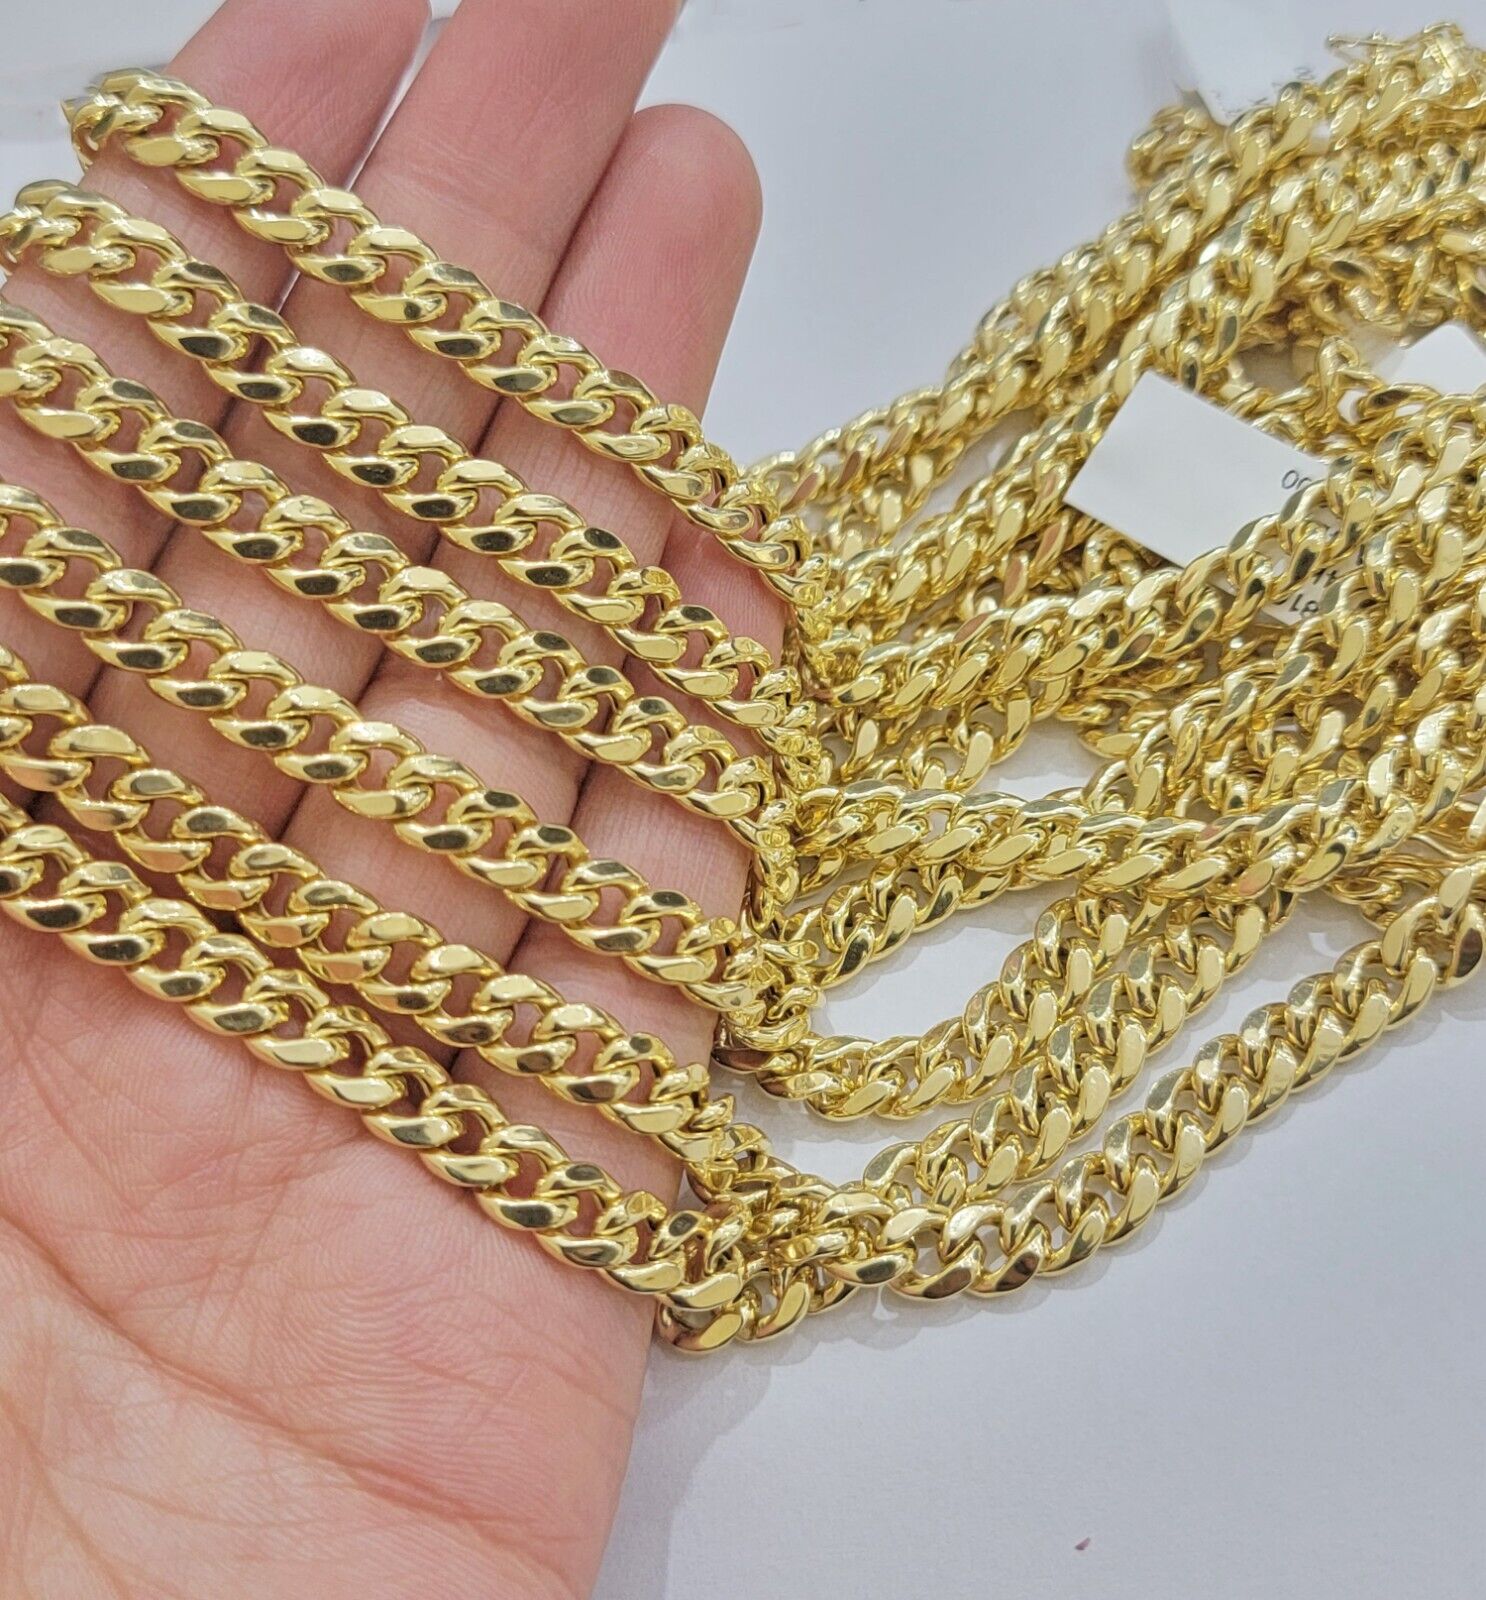 6mm - Cuban Link Chain - 14K Gold Bonded